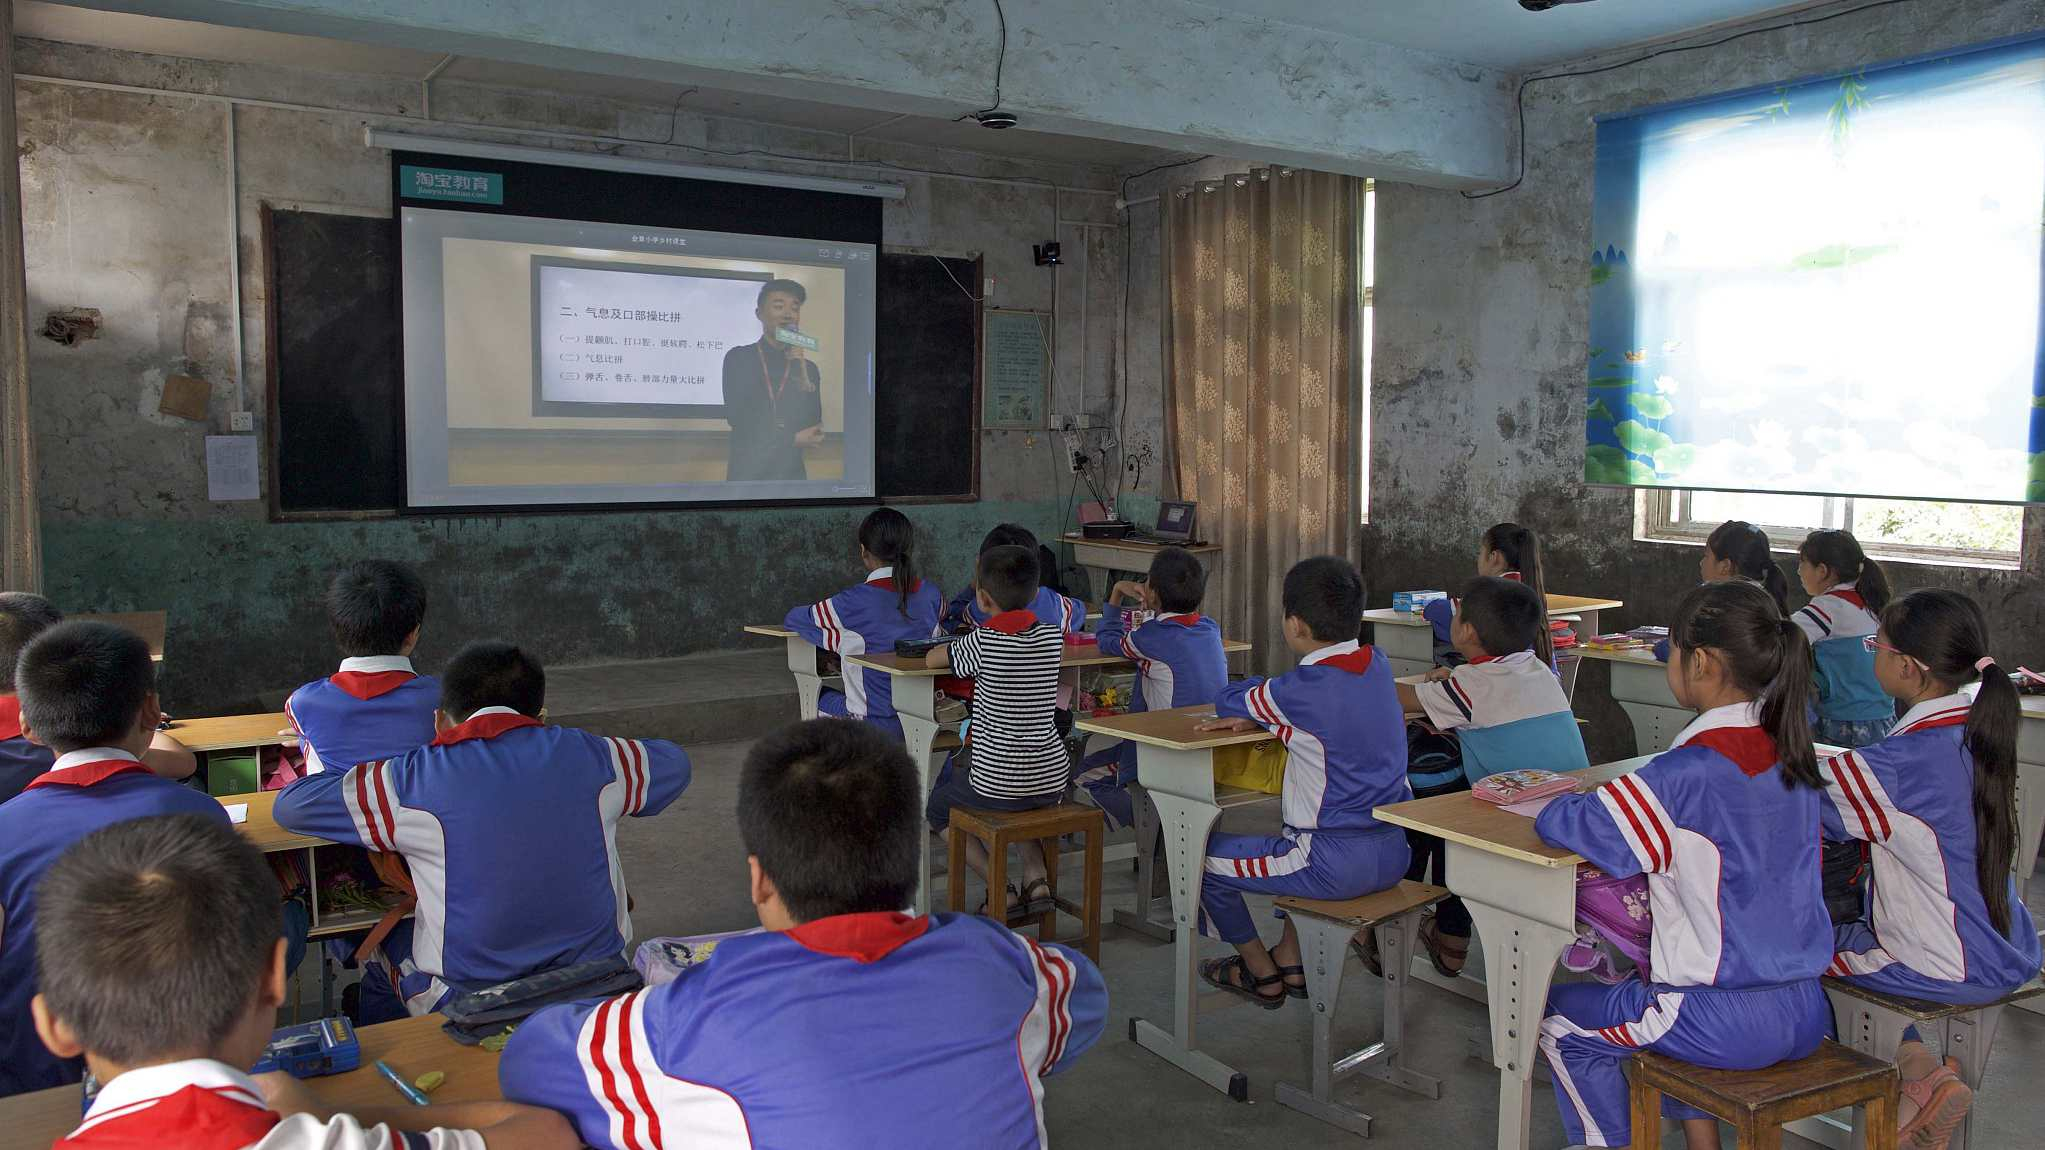 Students in rural communities learning through a screen projector